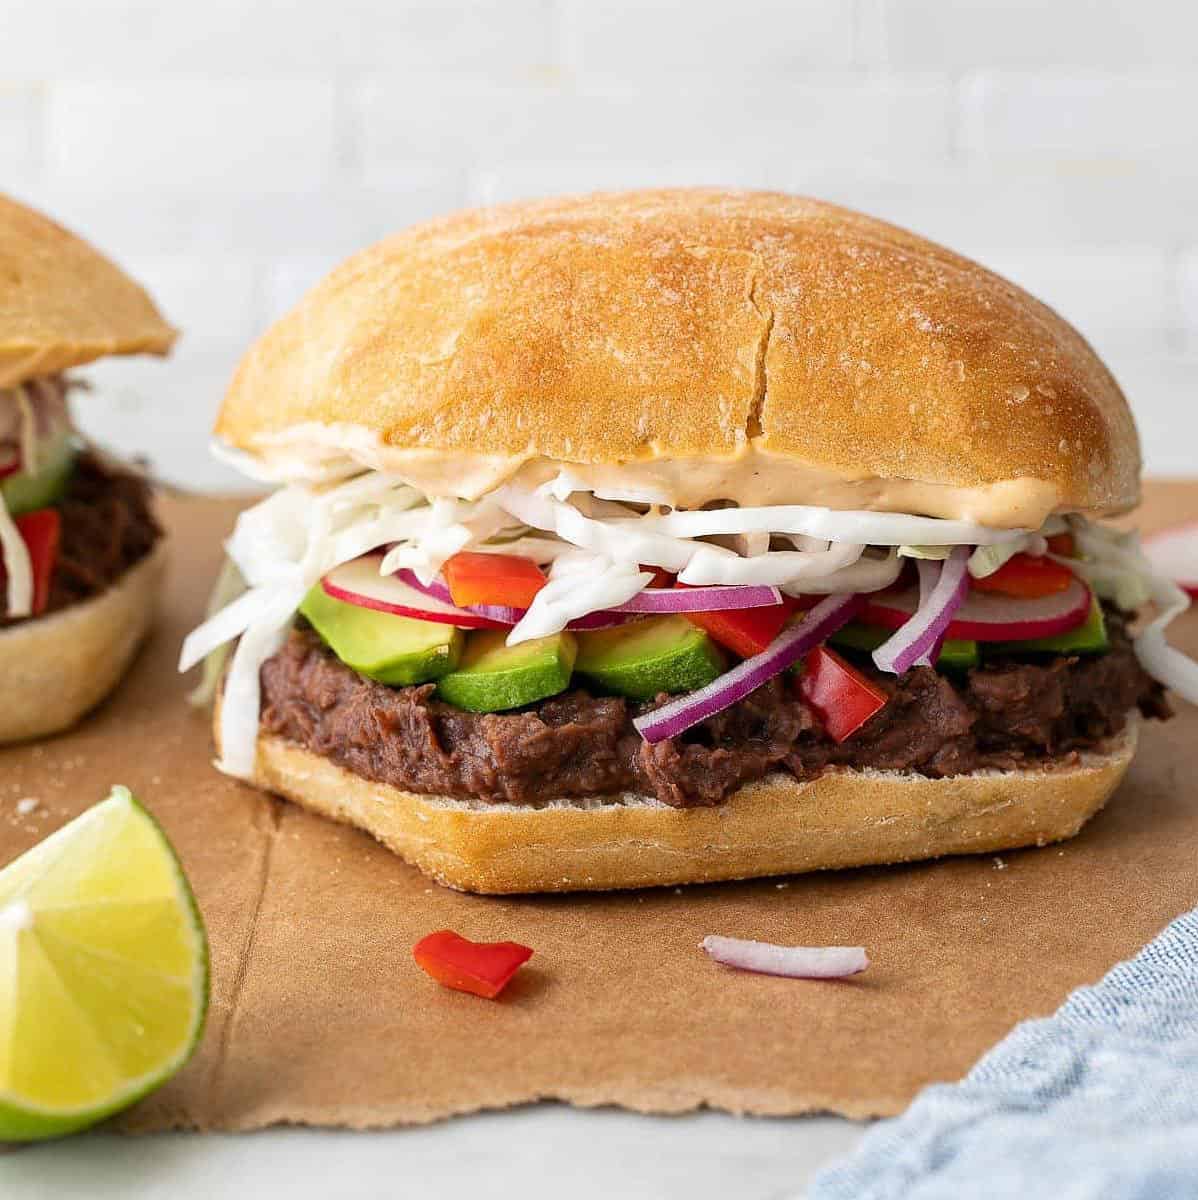  Your taste buds will thank you for trying this vegetarian twist on a classic Mexican sandwich.